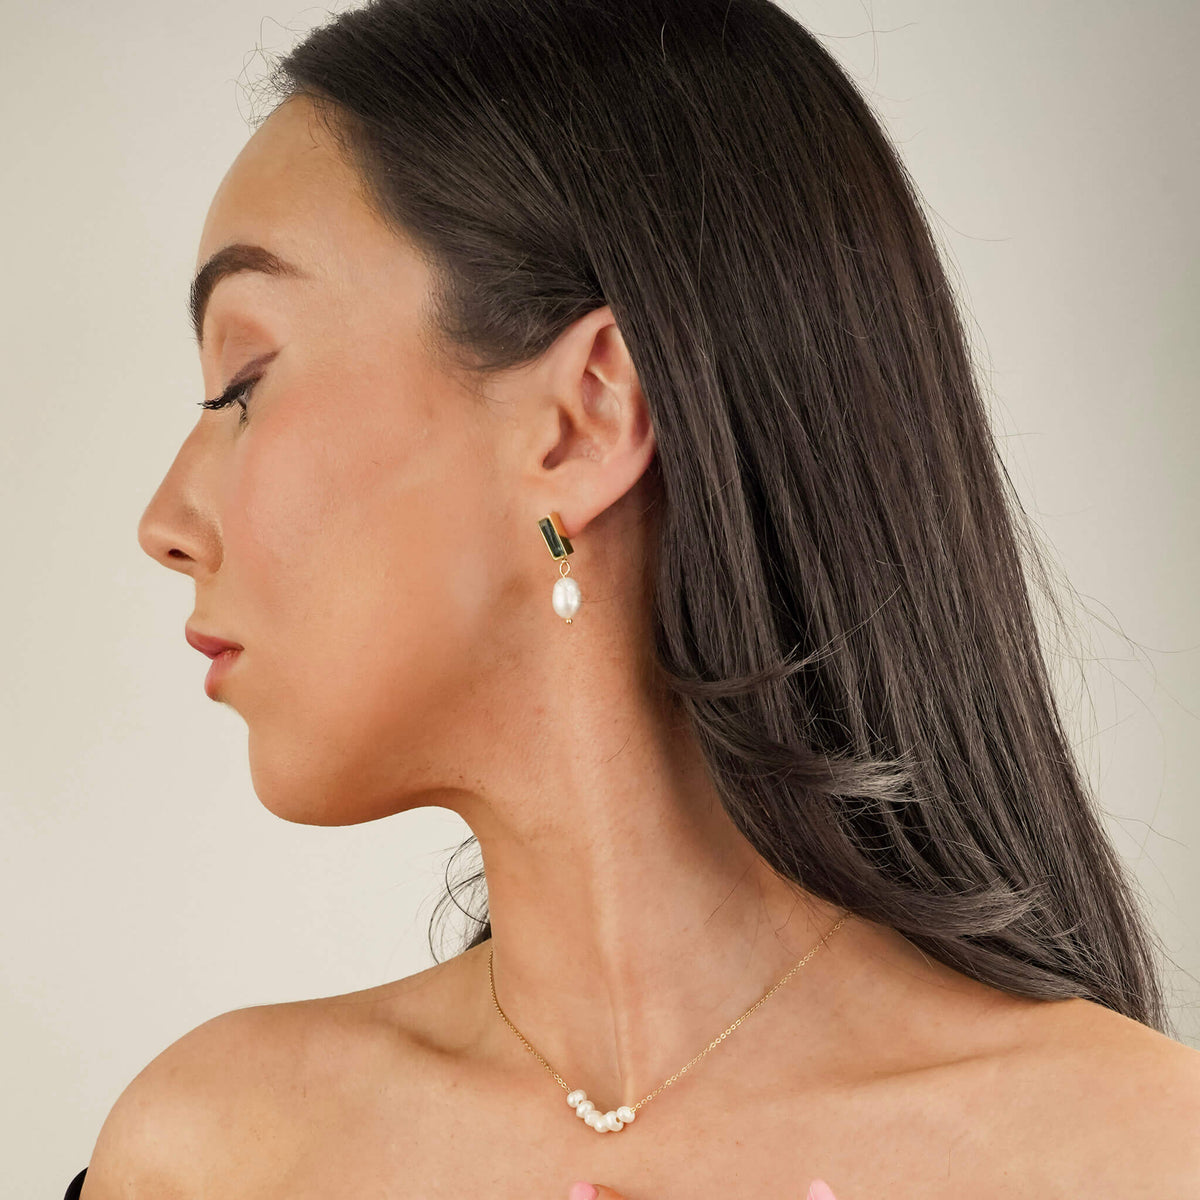 the model is wearing drop style earrings. the earrings have a onyx stone stud with a pearl suspended from them. the black onyx stone and the white pearl create a sophisticated contrast. The model is also wearing the Oceanic Pearl necklace which has 6 pearls.